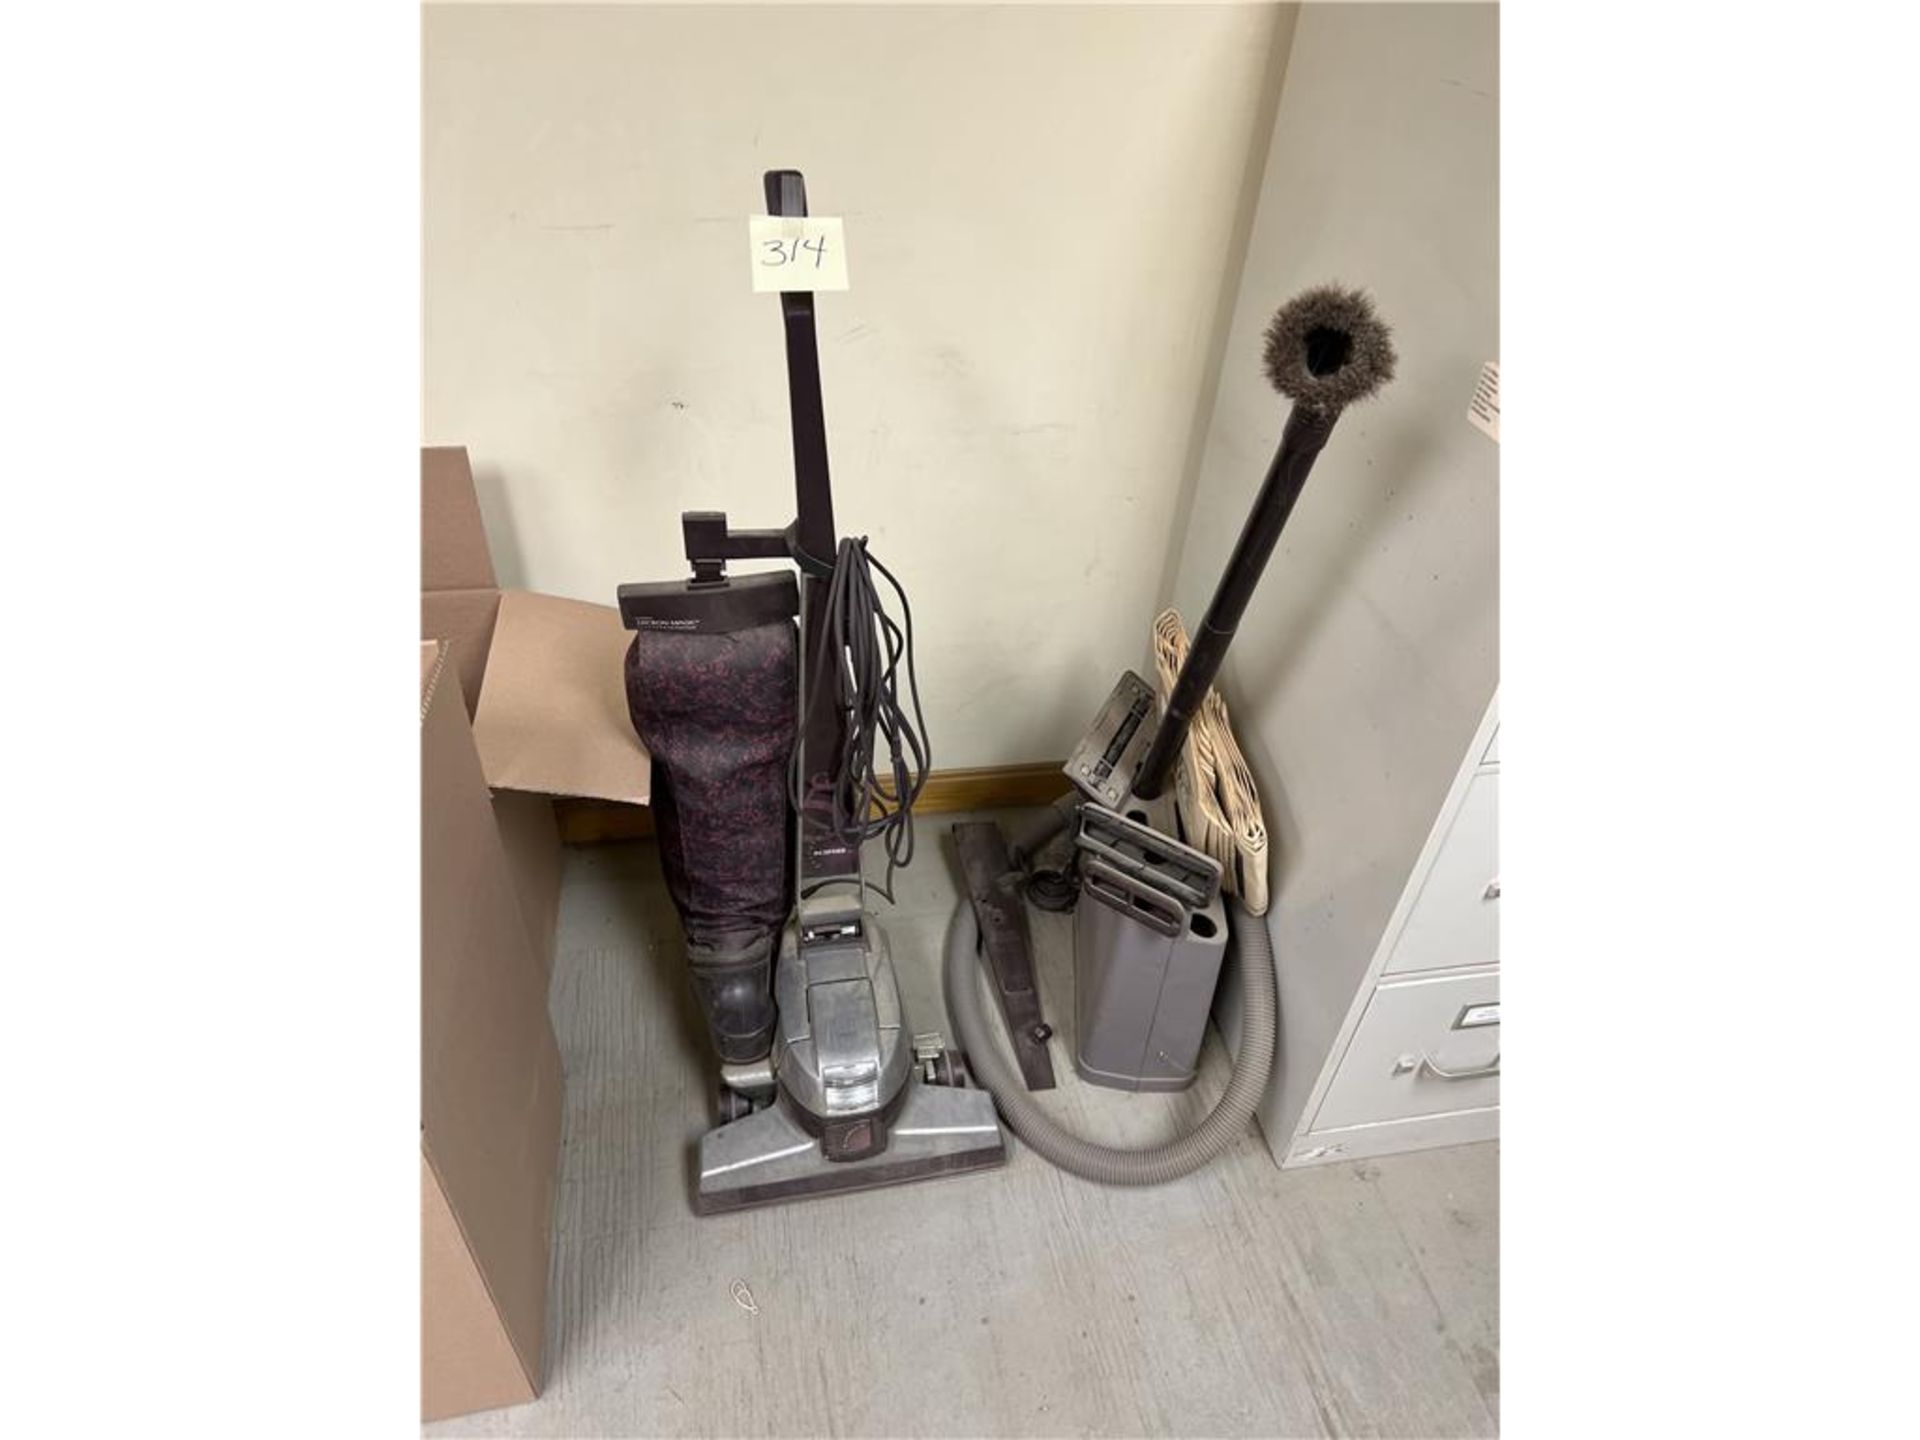 KIRBY G5 PERFORMANCE VACUUM CLEANER & ATTACHMENTS